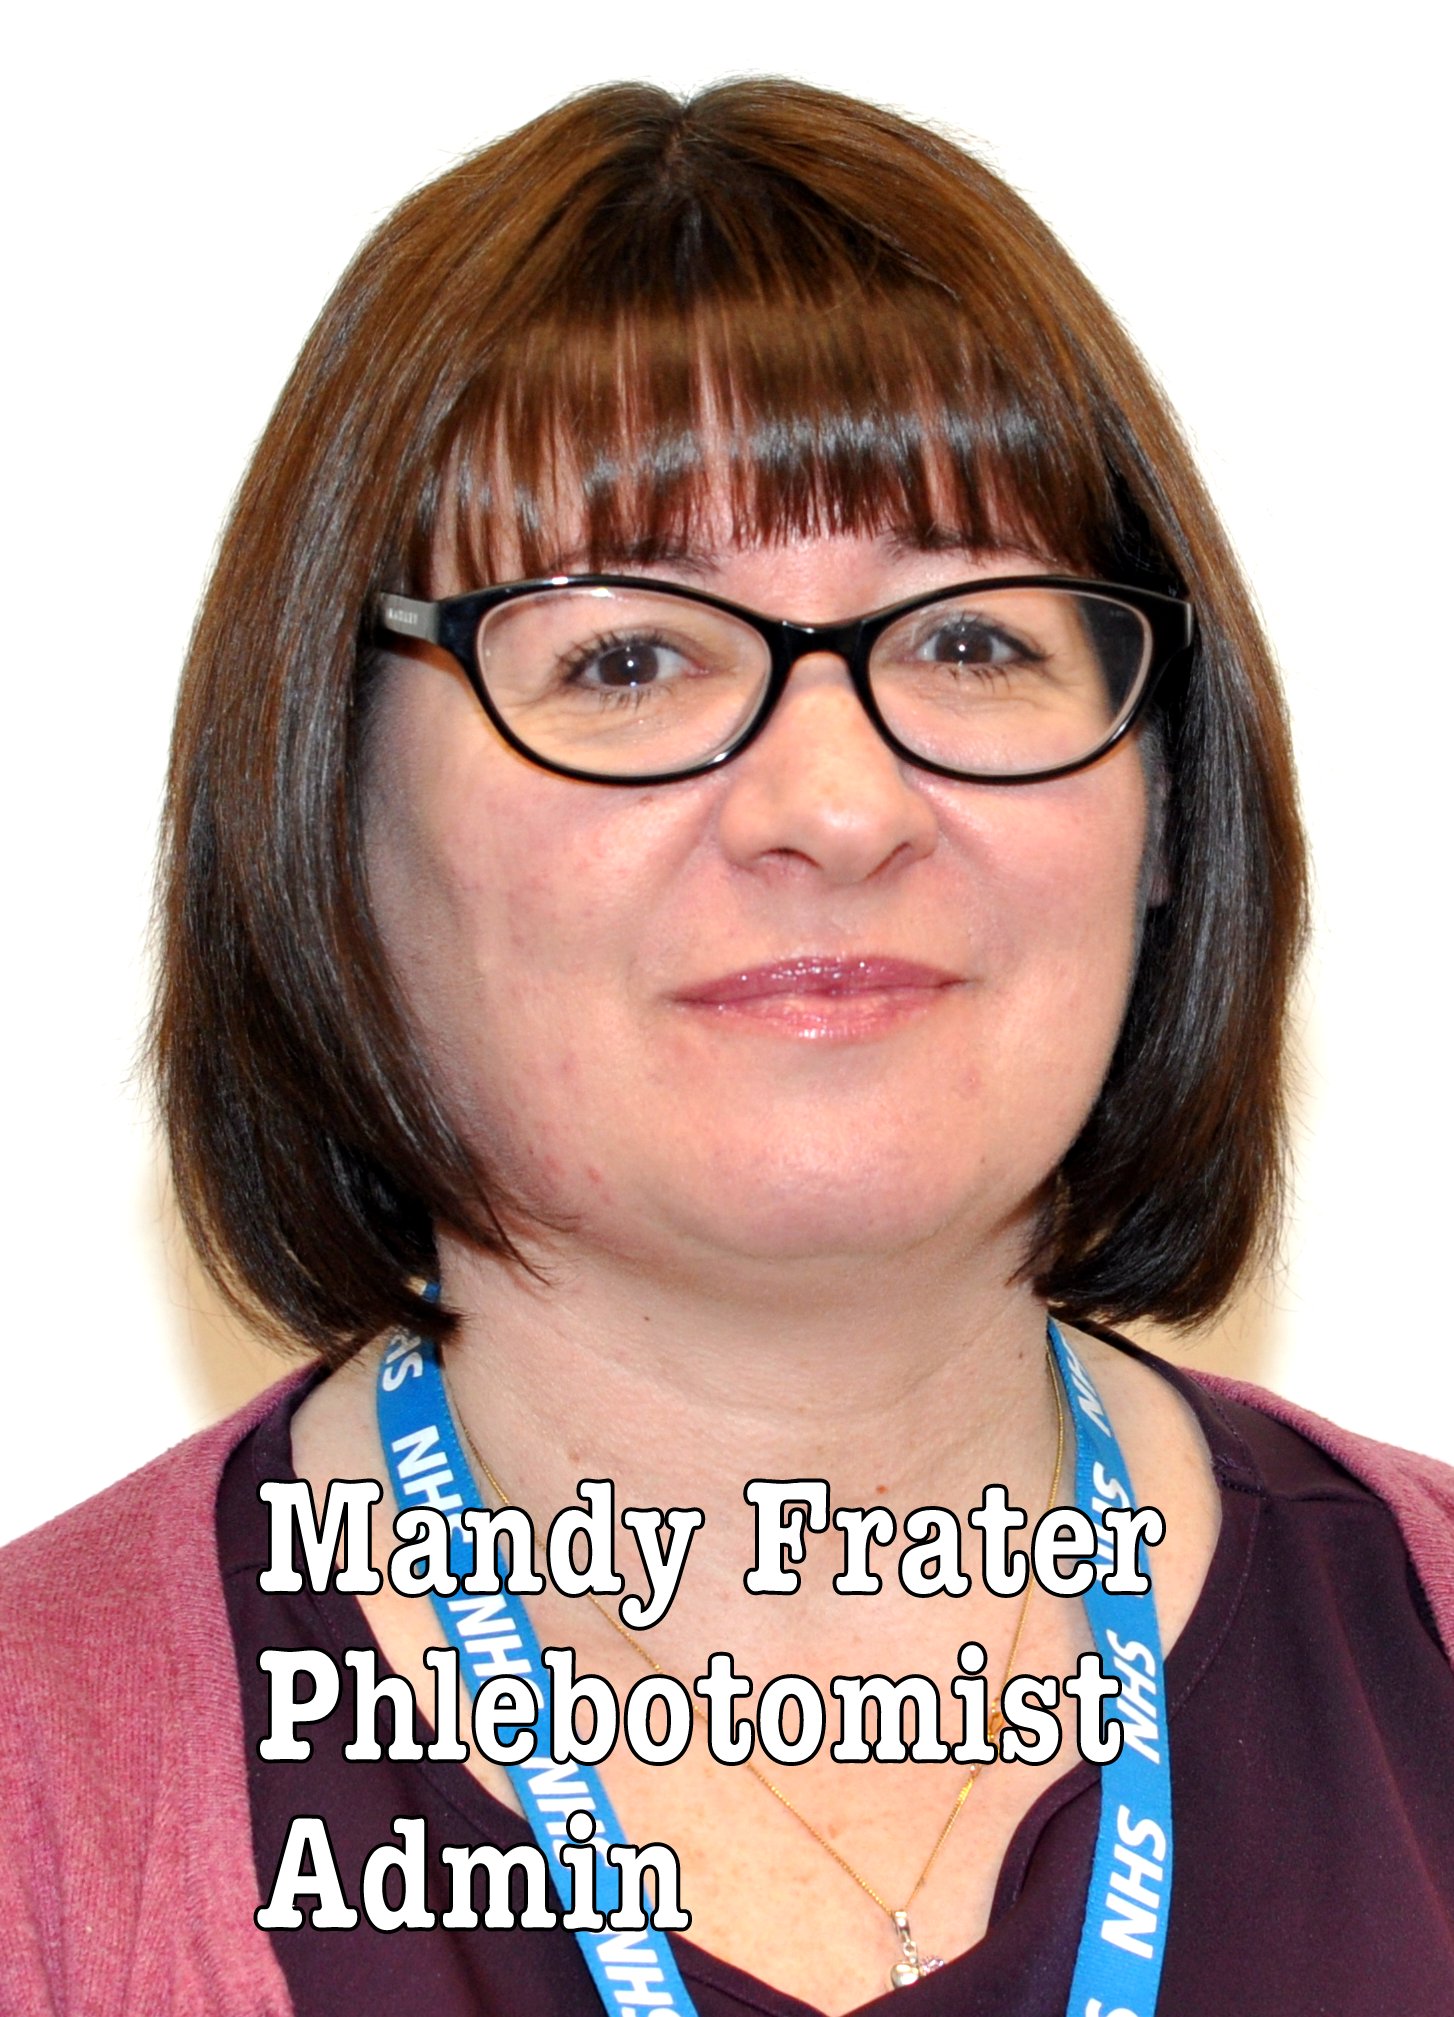 Mandy Frater